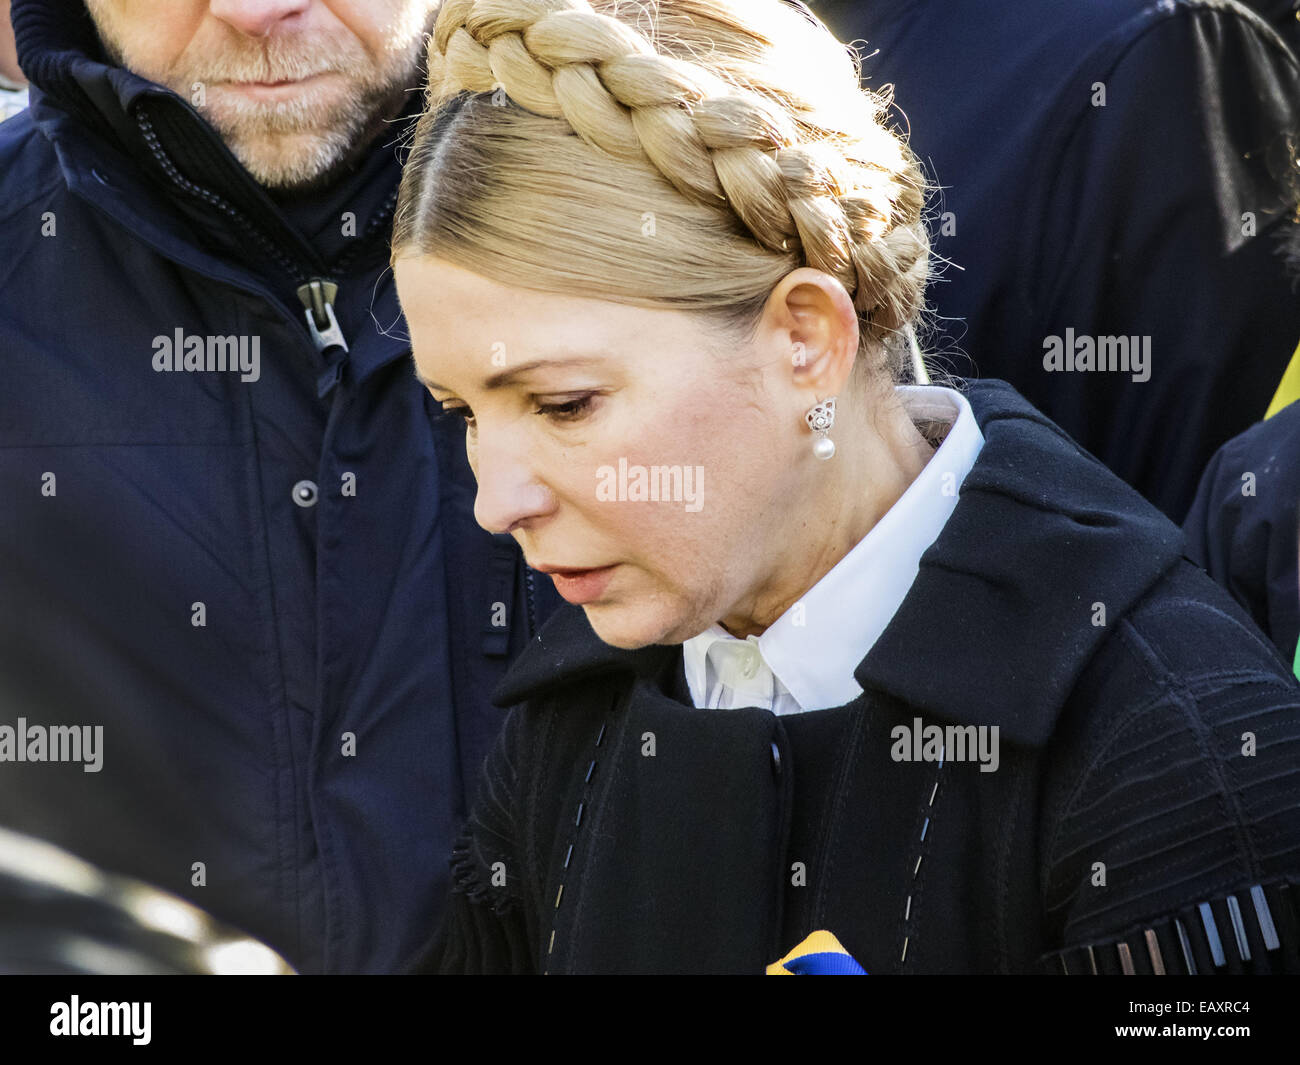 Nov. 21, 2014 - Yulia Tymoshenko lays flowers heroes Hundreds of Heaven -- Ukrainians celebrated the anniversary of Euromaidan, which was a wave of demonstrations and civil unrest in Ukraine, which began on 21 November 2013 with public protests in Independence Square in Kiev, demanding closer European integration. © Igor Golovniov/ZUMA Wire/Alamy Live News Stock Photo